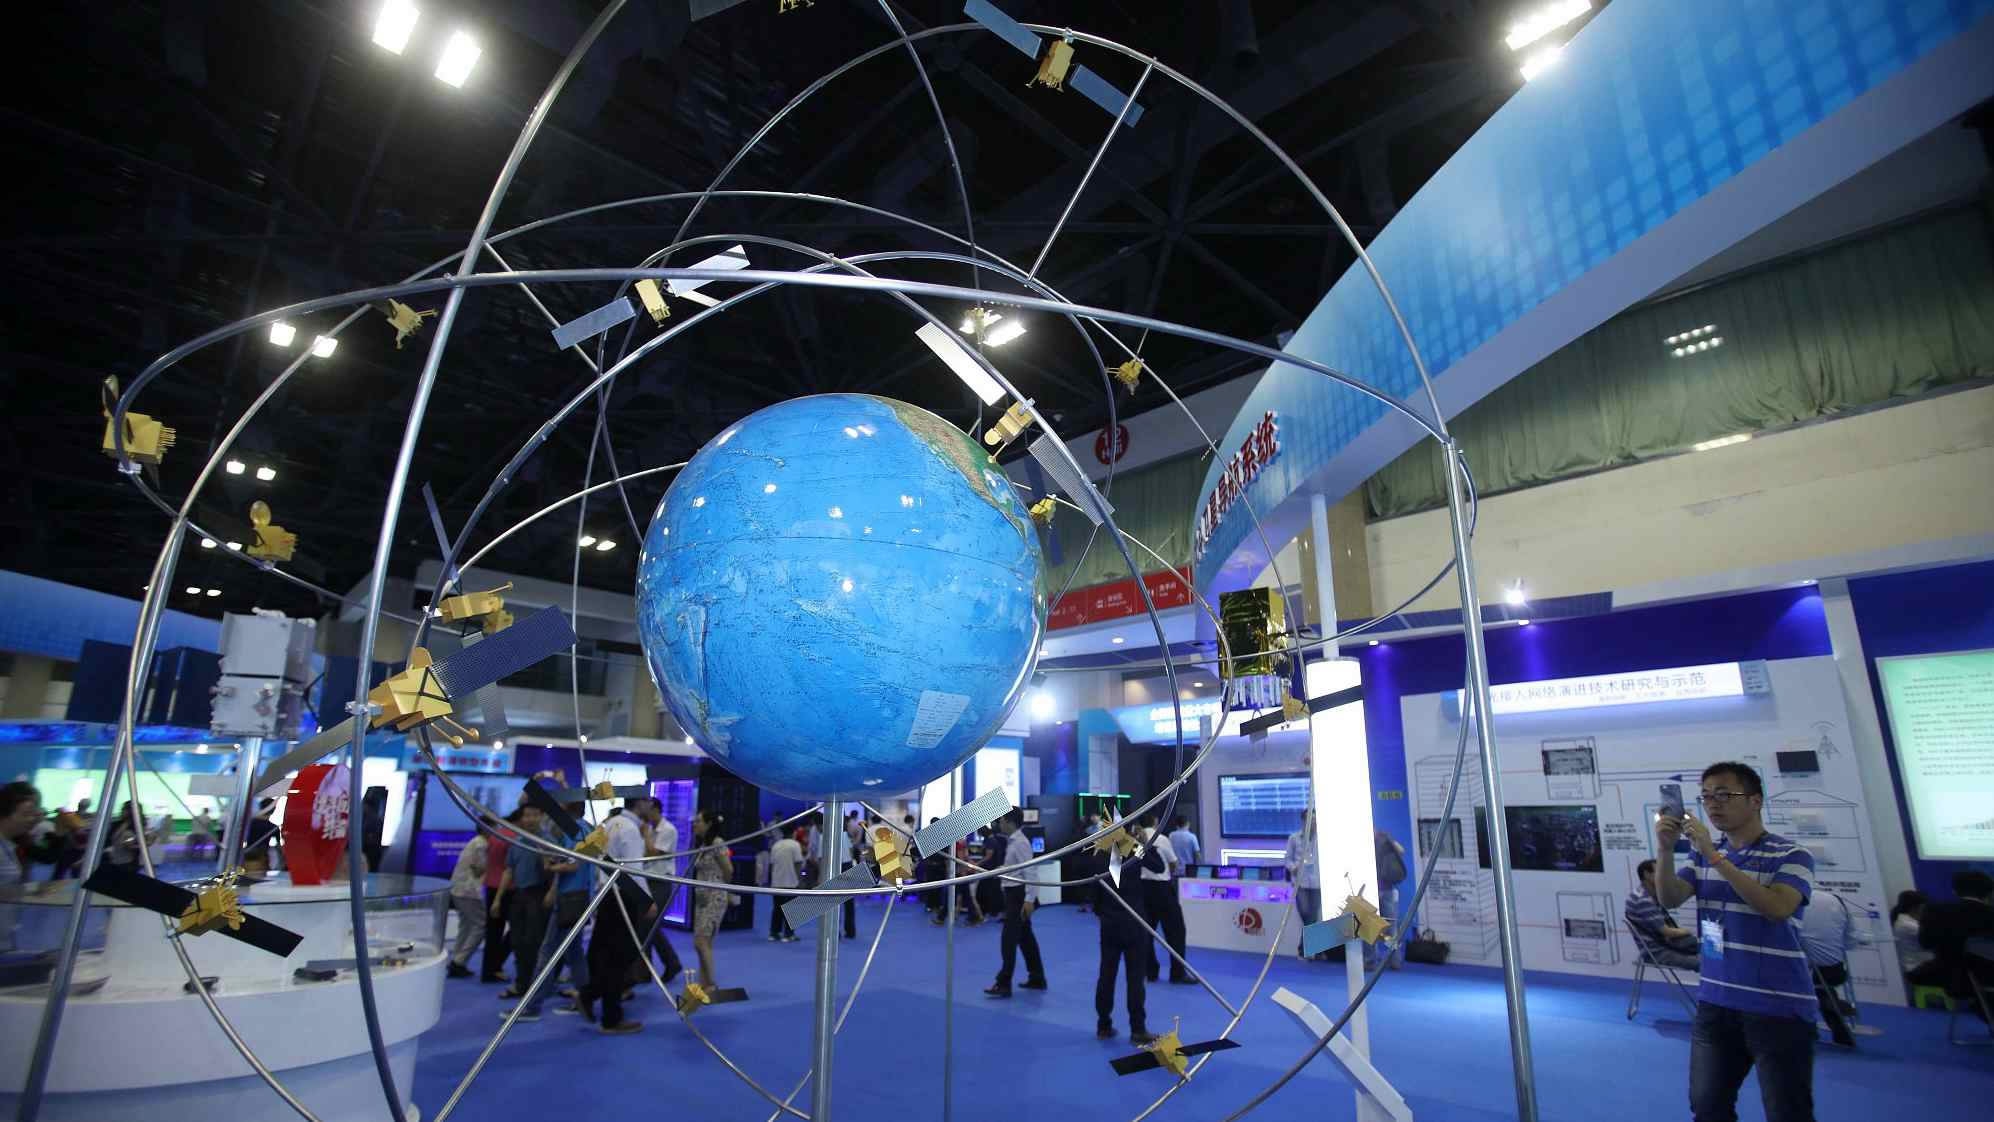 The Rise of BeiDou Satellite Network: China's challenge against GPS